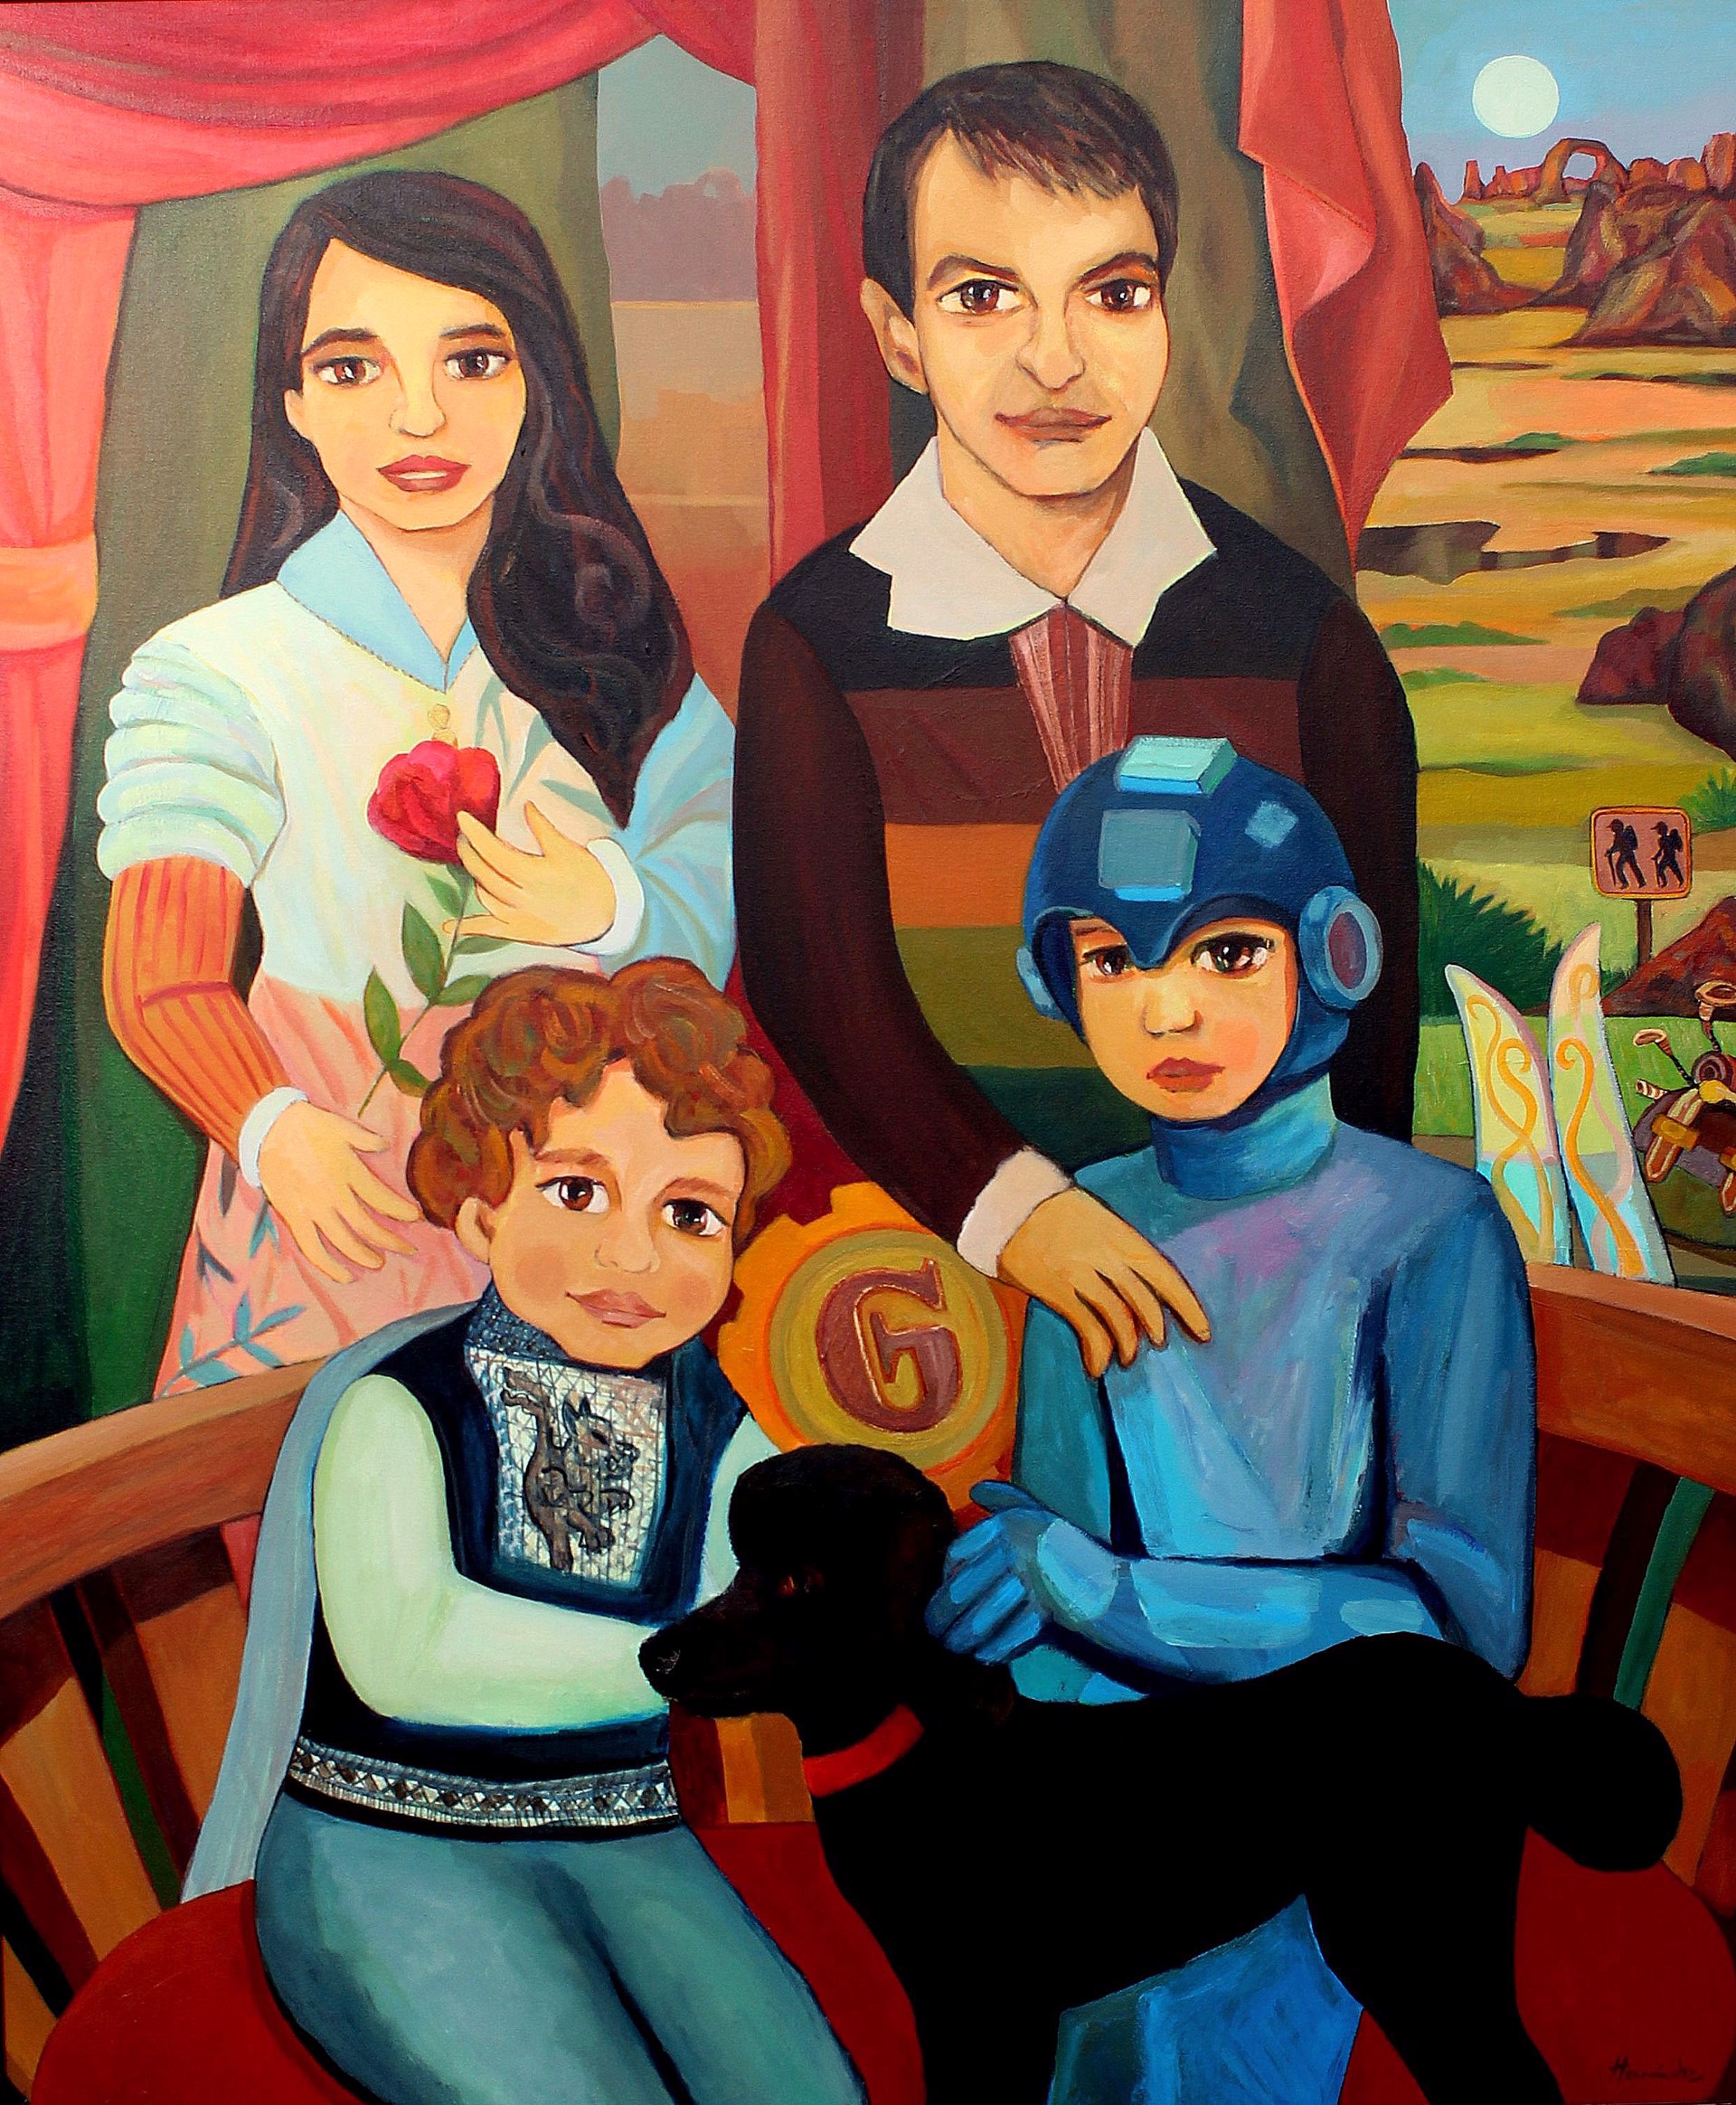 Family Portrait (Commissioned Work) by William Hernandez